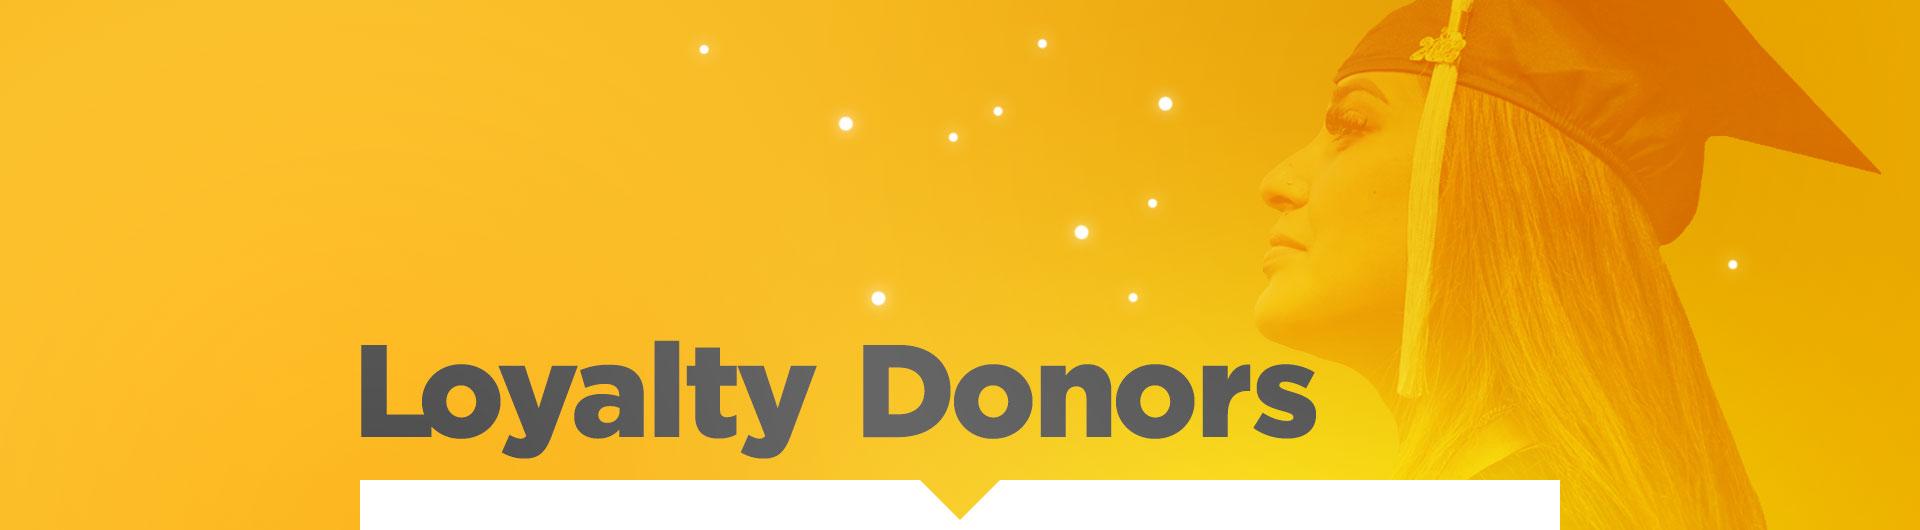 Loyalty Donors